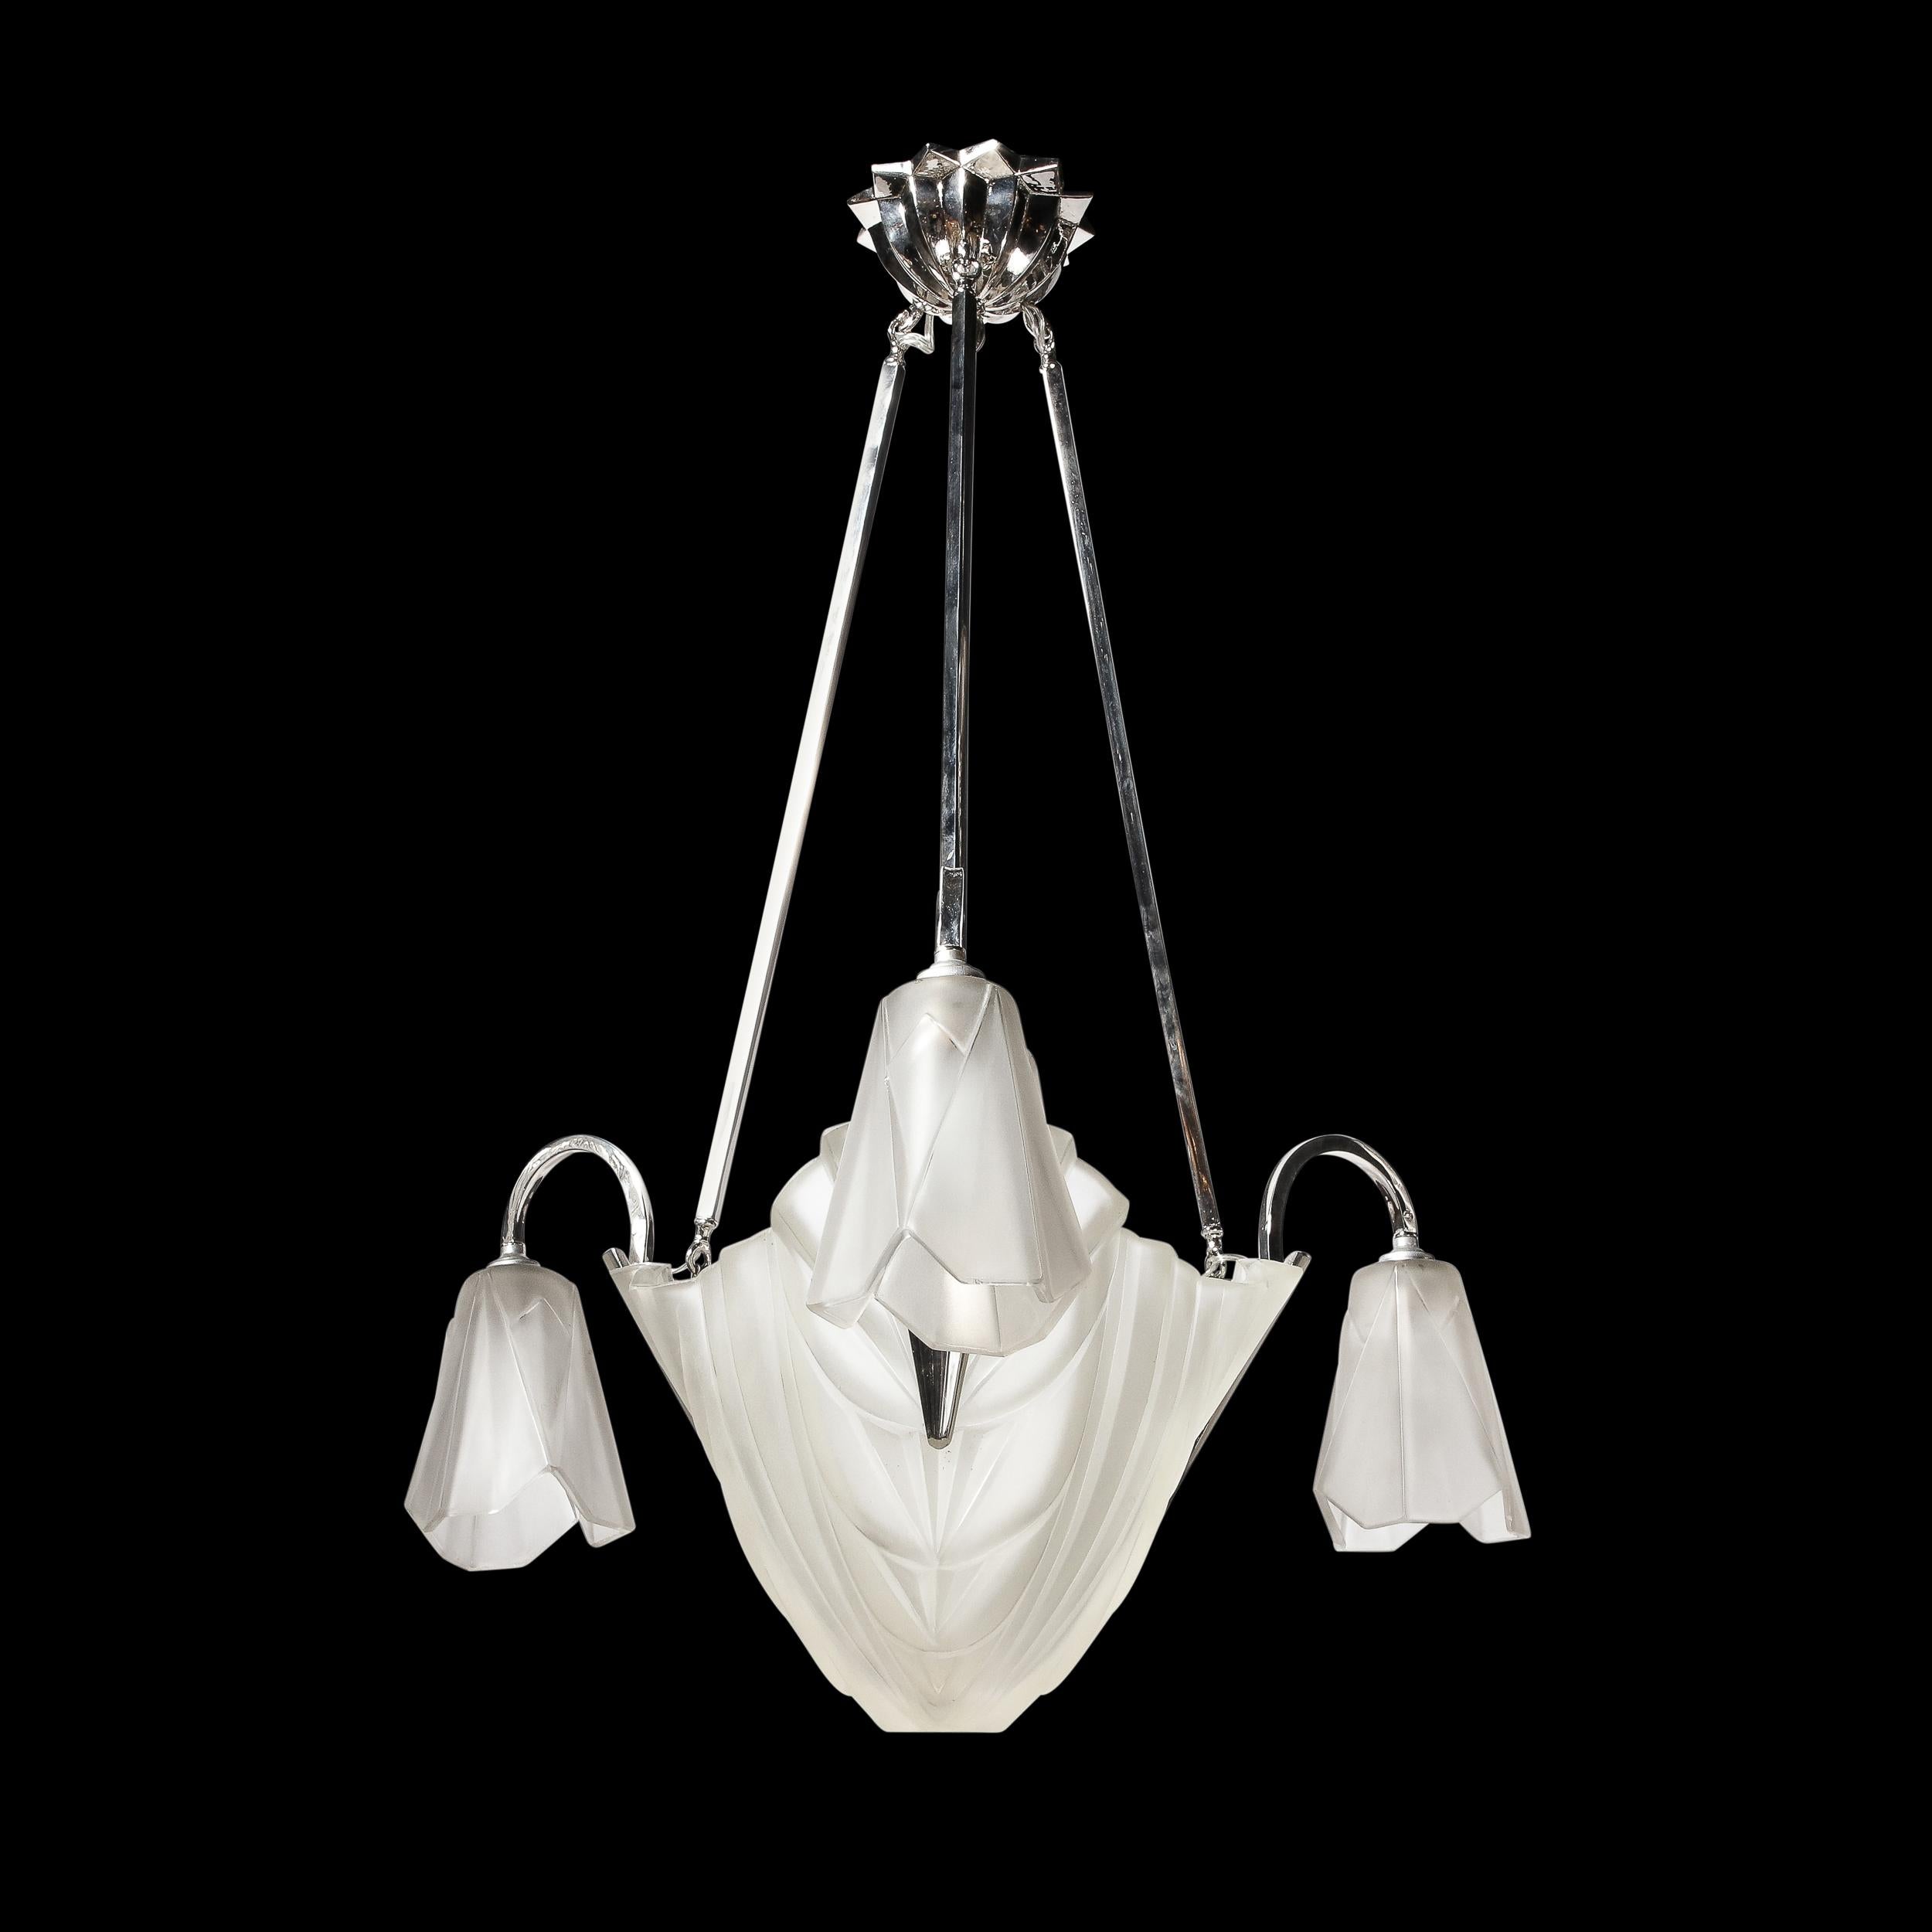 This magnificent Art Deco Chandelier originates from France, Circa 1920 and is made of frosted molded glass and is adorned with swooping curvilinear geometric skyscraper detailing on the central and hanging glass shades. The canopy has starburst